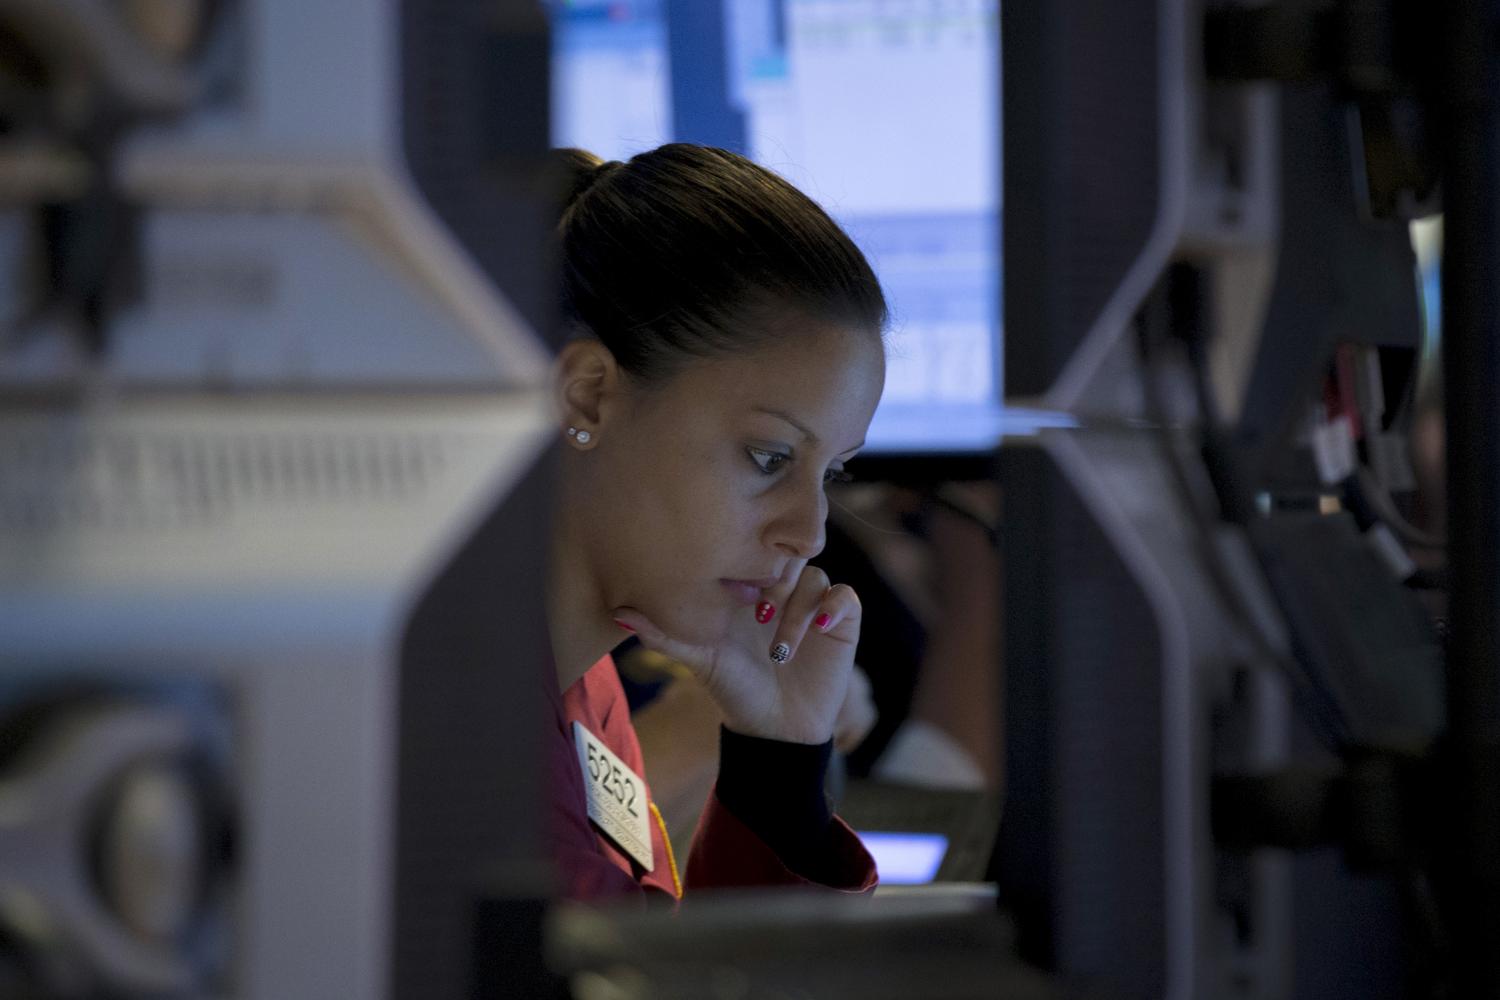 A trader works inside a booth on the floor of the New York Stock Exchange